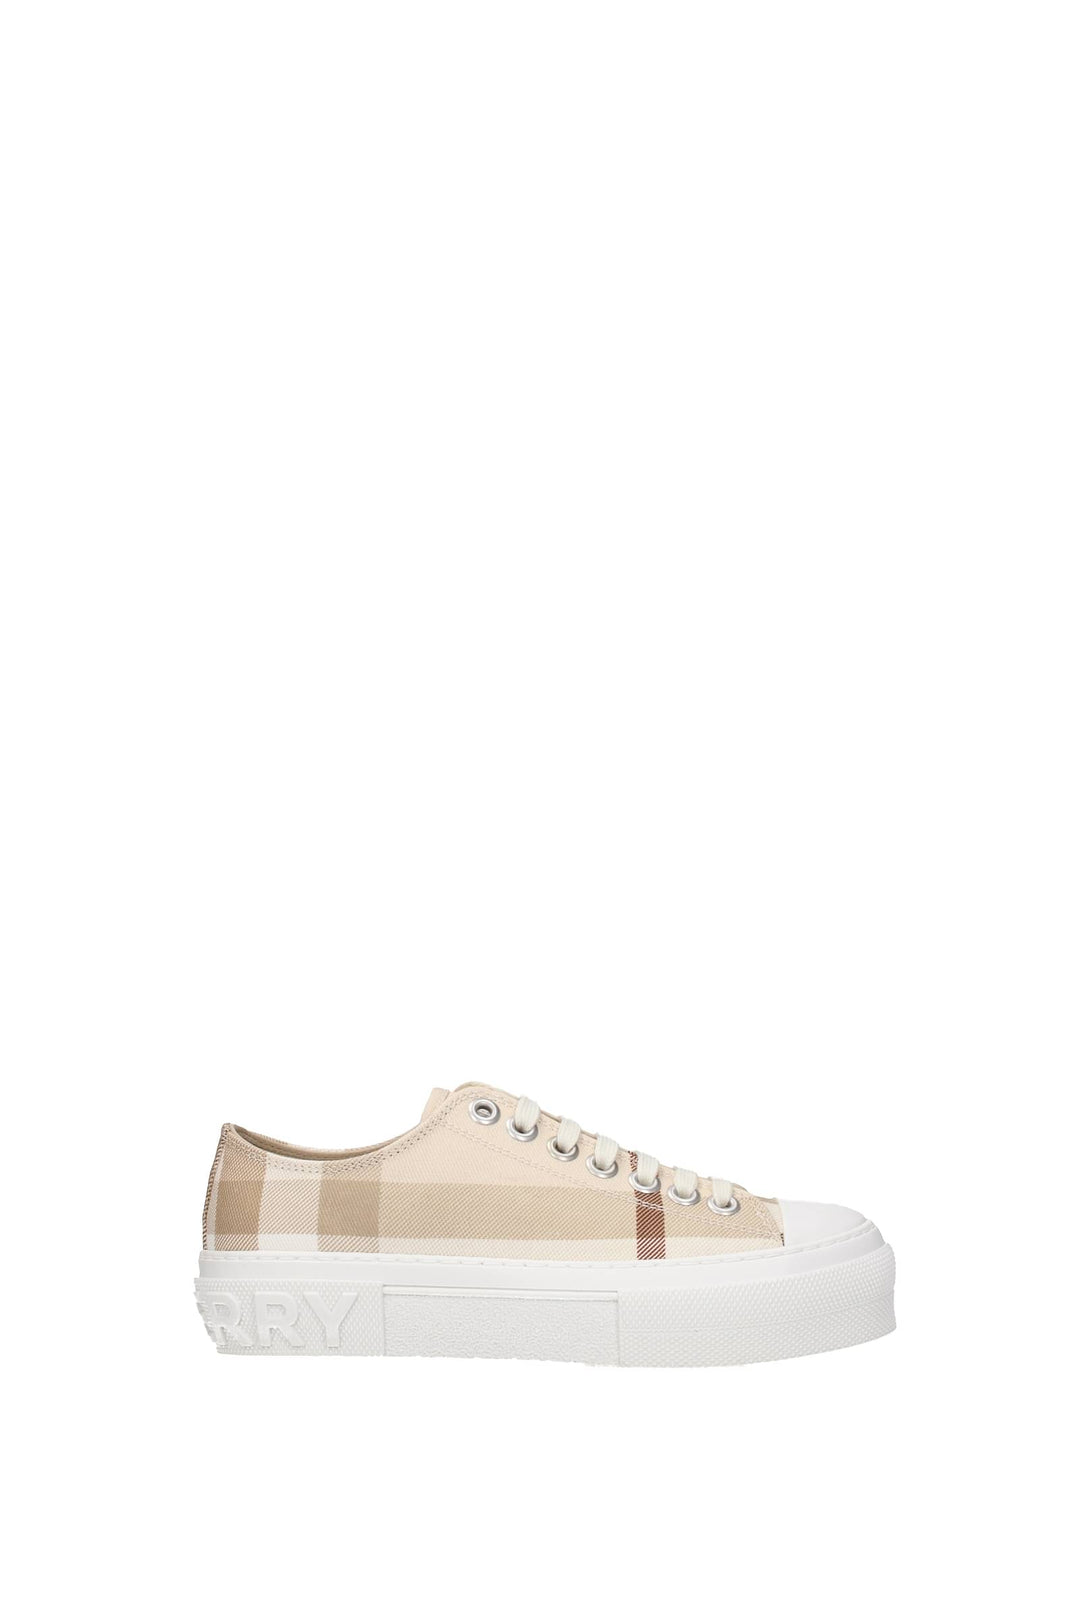 Sneakers Cotone Beige Fawn - Burberry - Donna